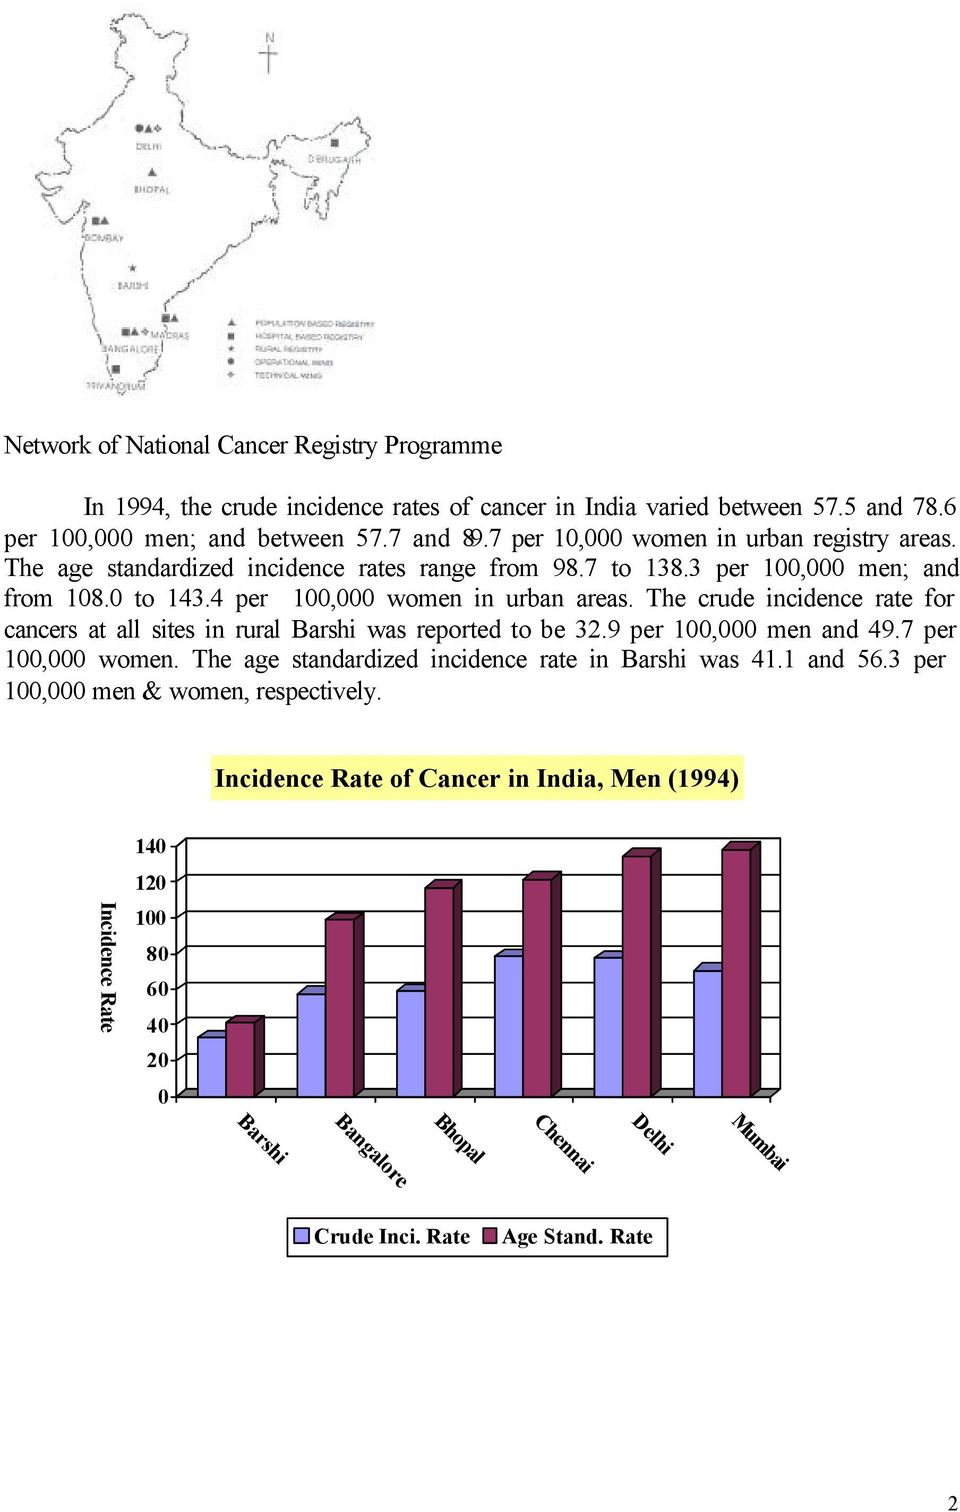 The crude incidence rate for cancers at all sites in rural Barshi was reported to be 32.9 per 100,000 men and 49.7 per 100,000 women. The age standardized incidence rate in Barshi was 41.